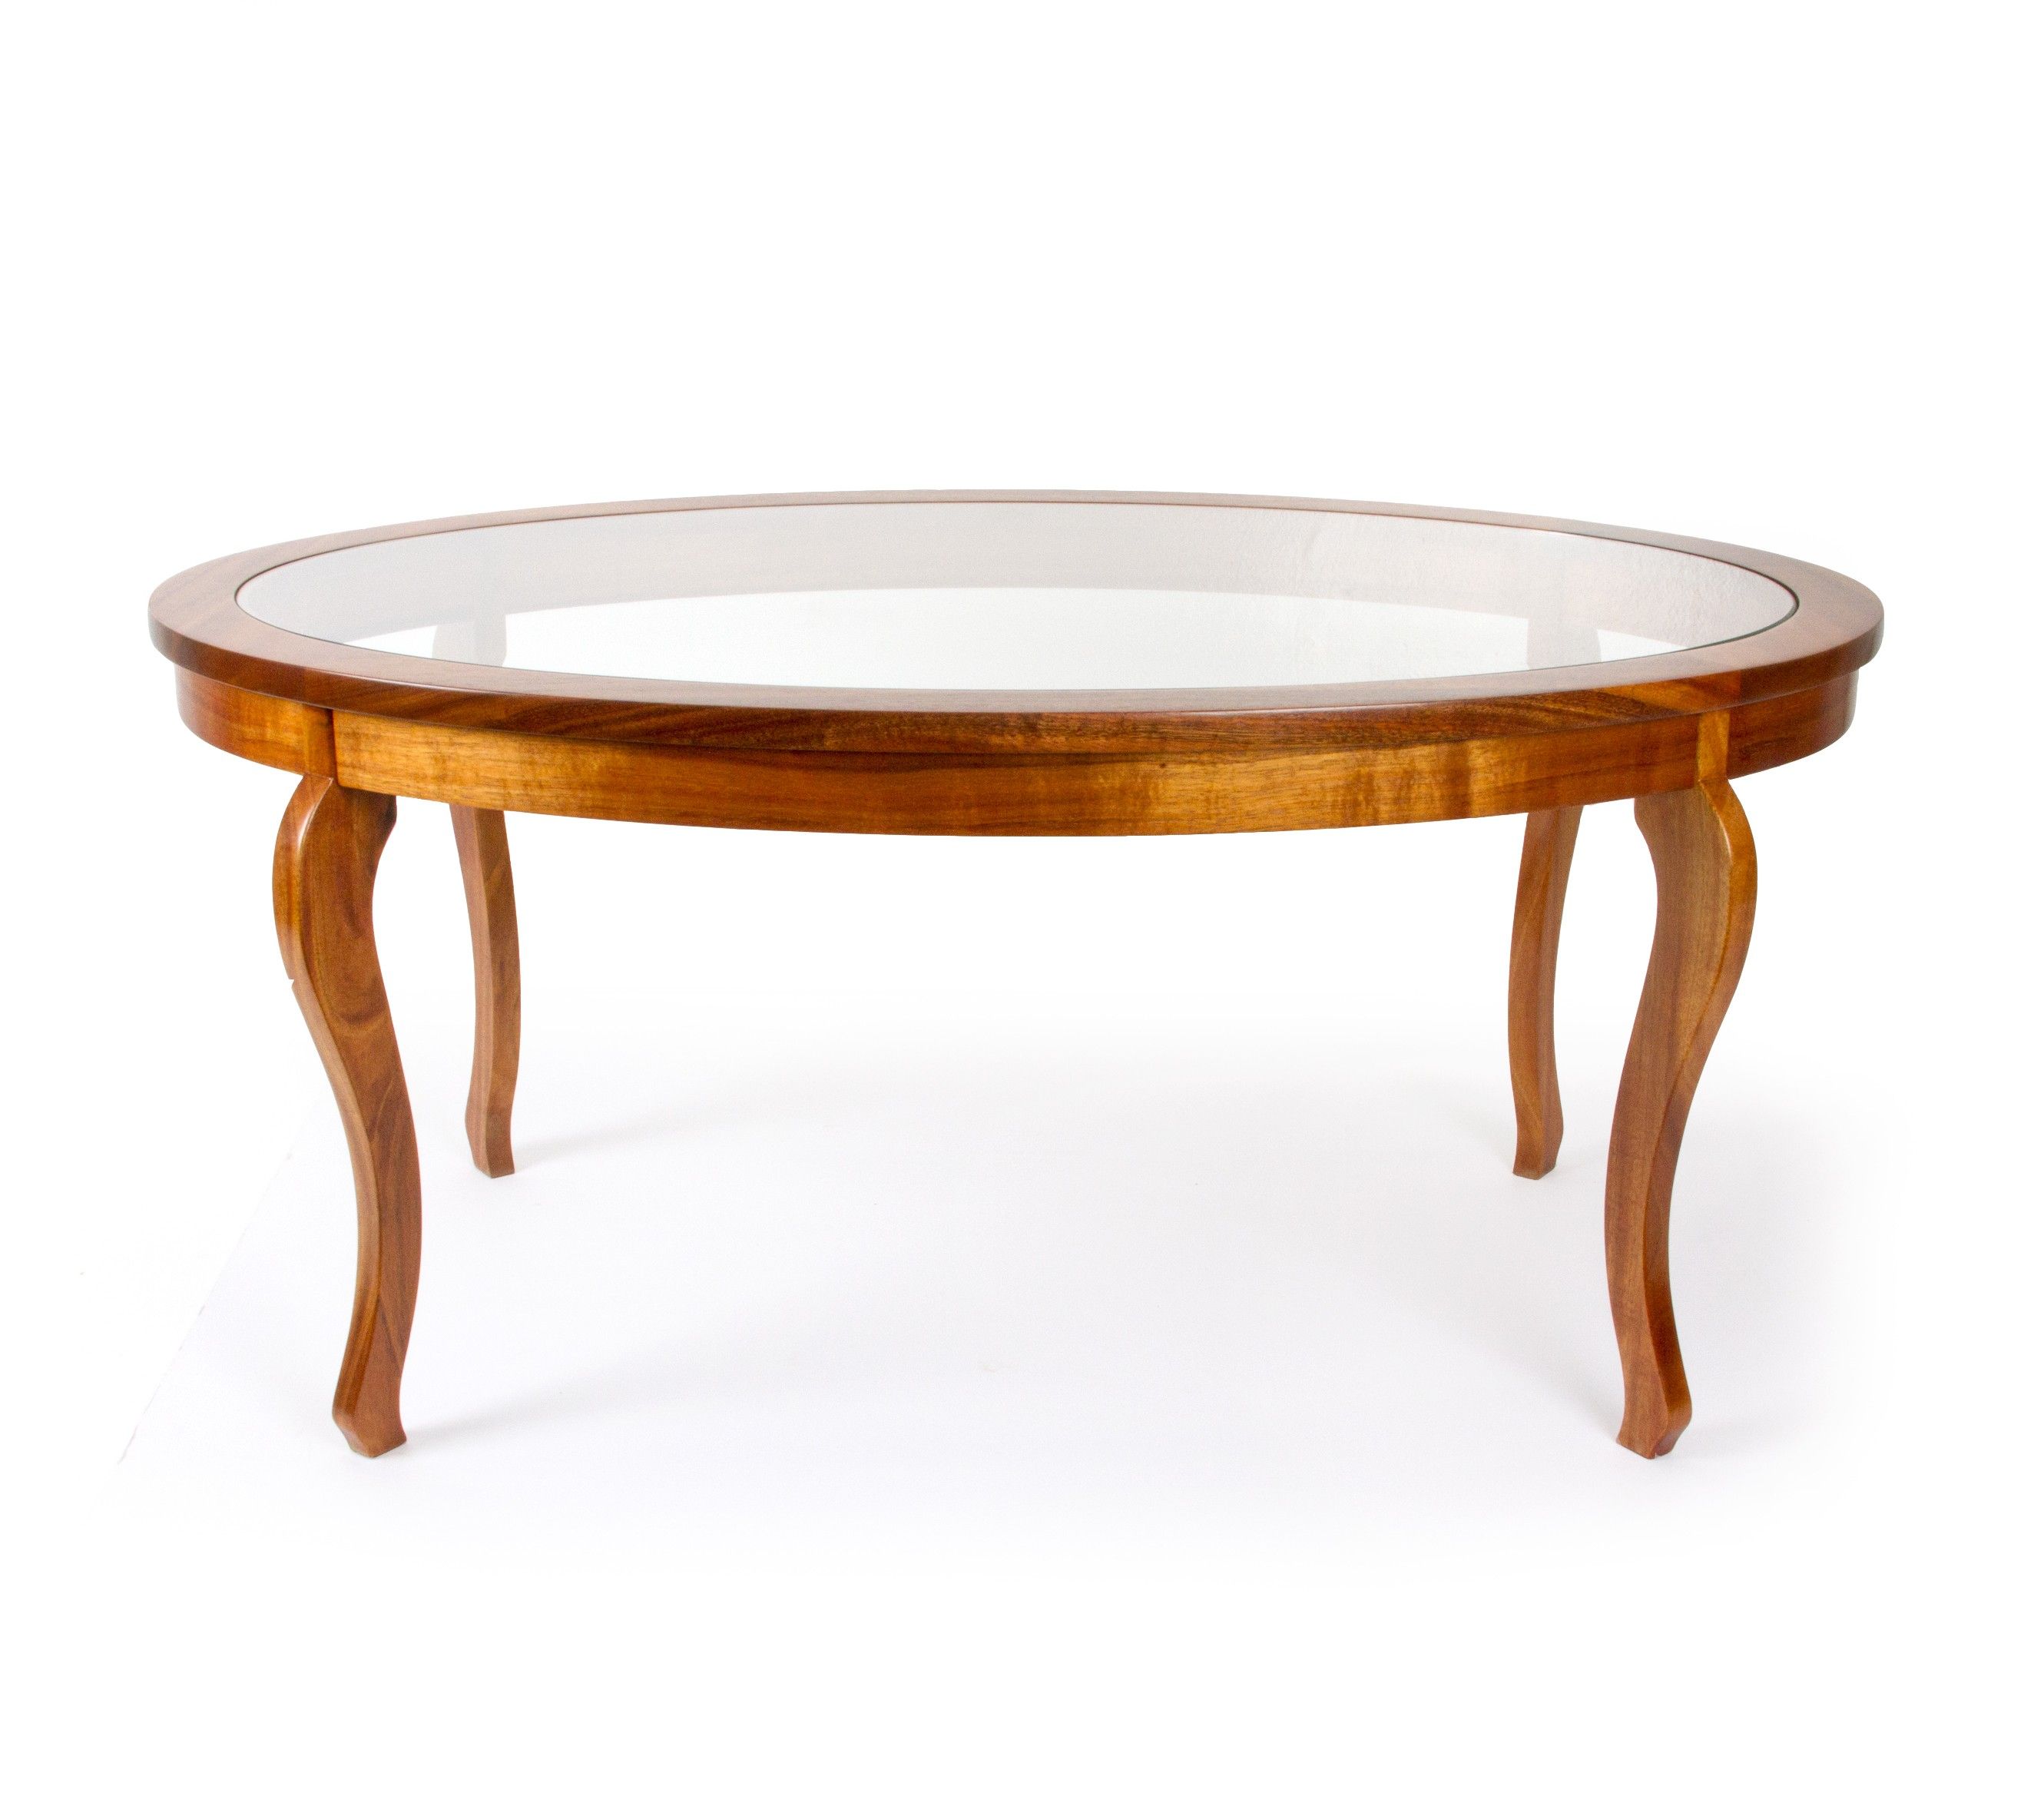 Furniture Oval Coffee Table With Glass Top And High Legs For Small Rustic Living Room Round Wood Coffee Table With Glass Top (View 2 of 10)